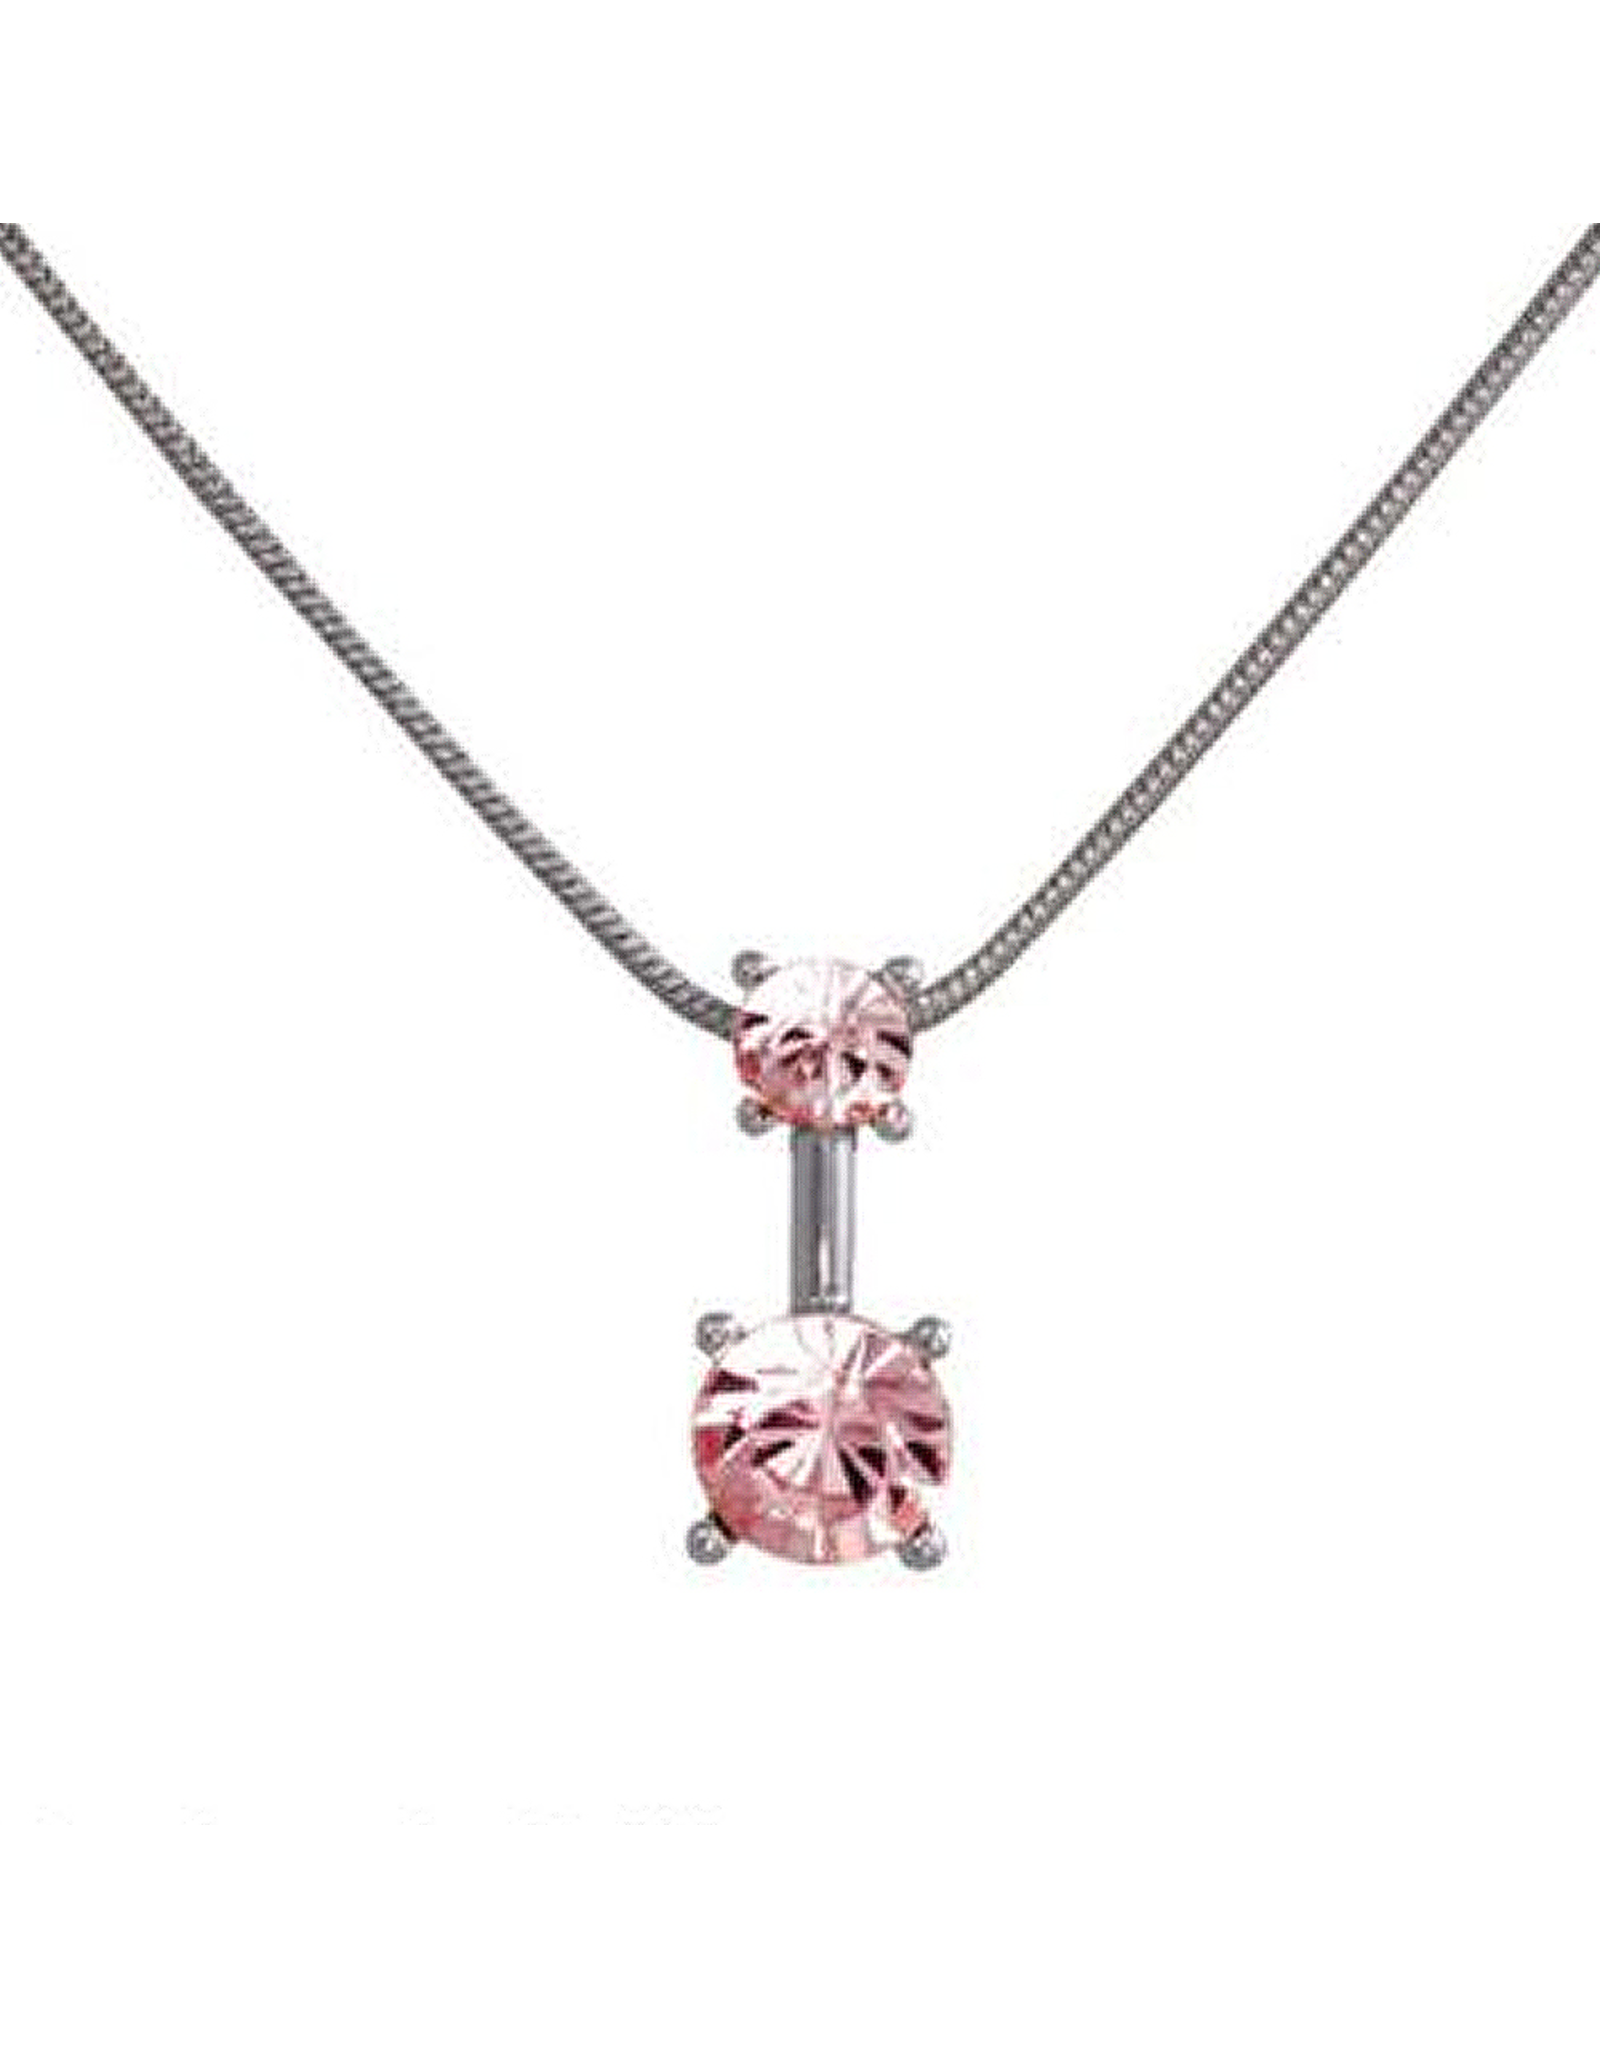 Annaleece Necklace Sweet Light Rose Rhodium Pendant with Crystals